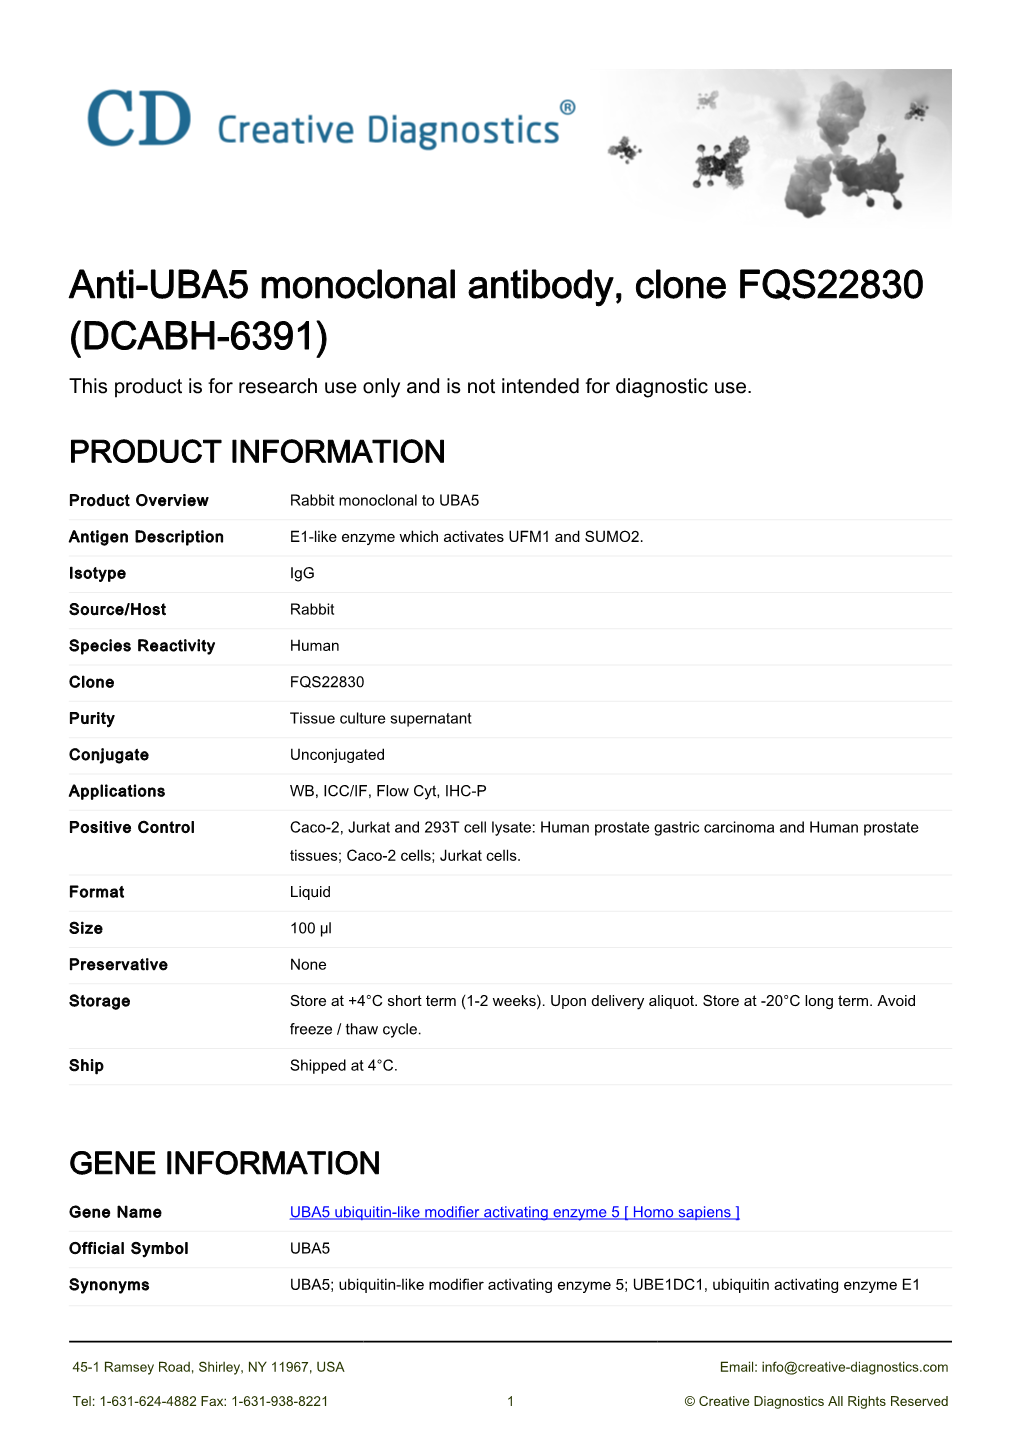 Anti-UBA5 Monoclonal Antibody, Clone FQS22830 (DCABH-6391) This Product Is for Research Use Only and Is Not Intended for Diagnostic Use